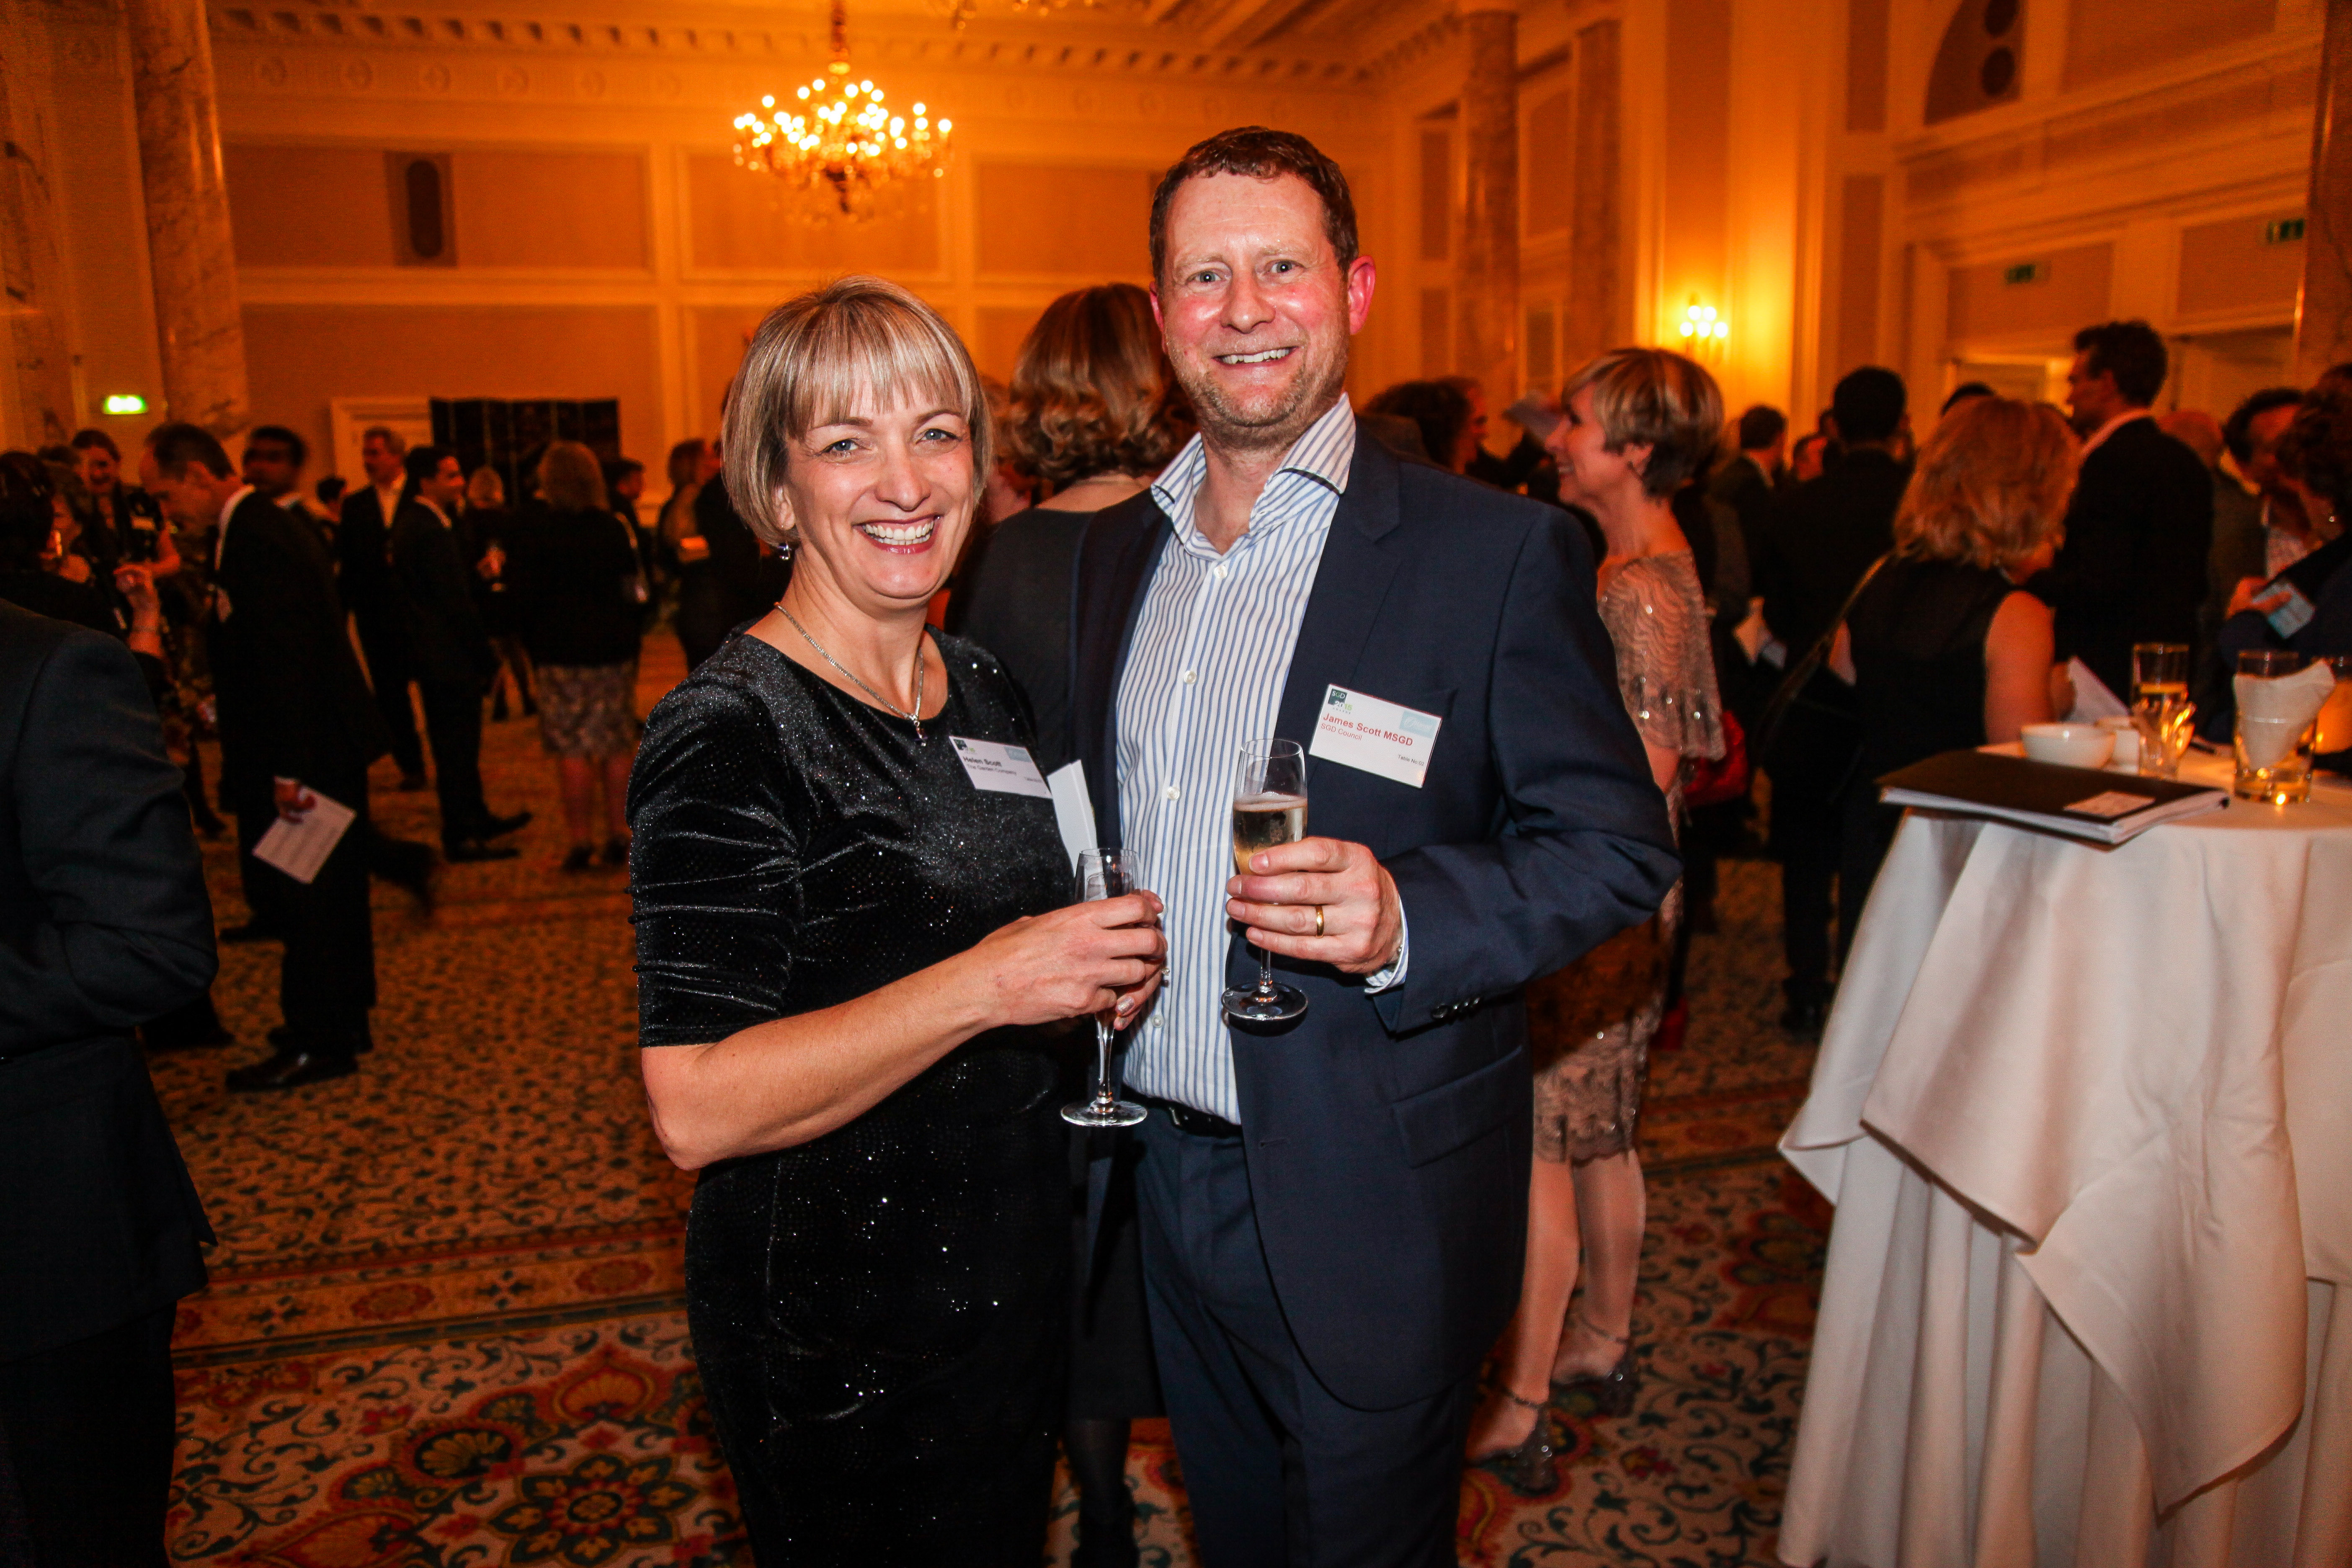 James and Helen Scott at the SGD Awards 2015